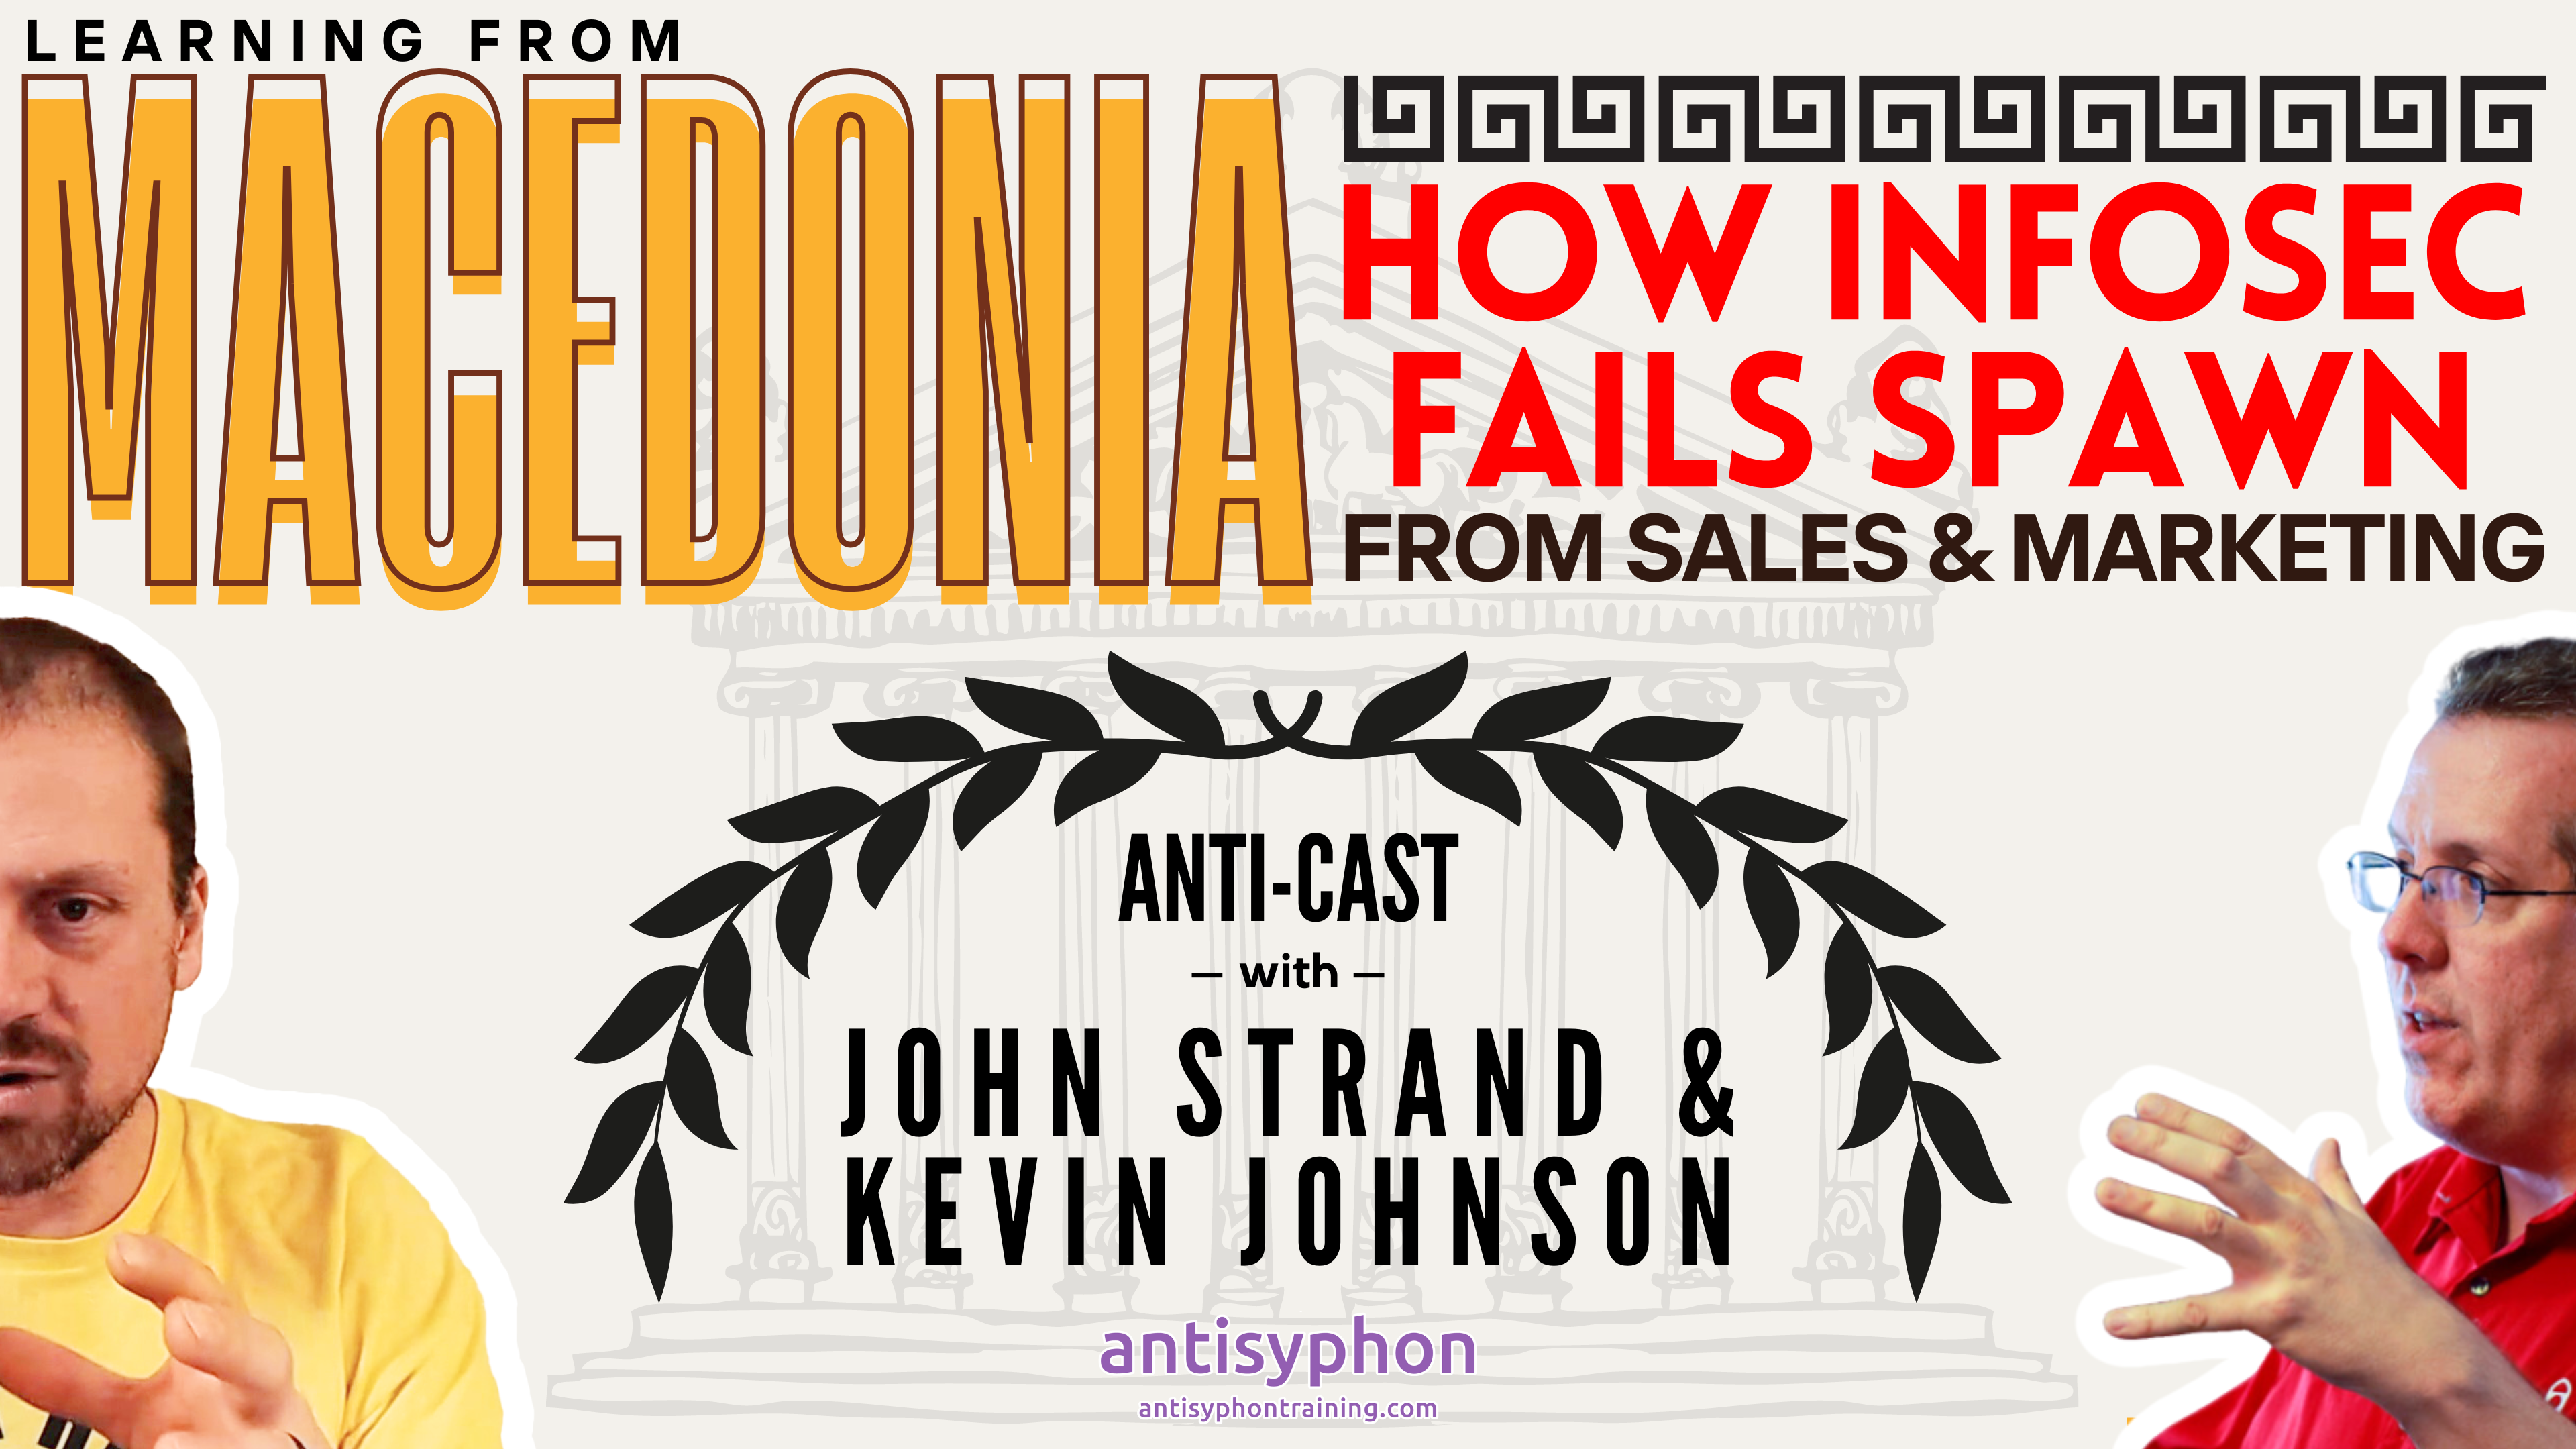 Anti-Cast | Learning from Macedonia: How InfoSec Fails Spawn from Sales & Marketing w/ John Strand and Kevin Johnson